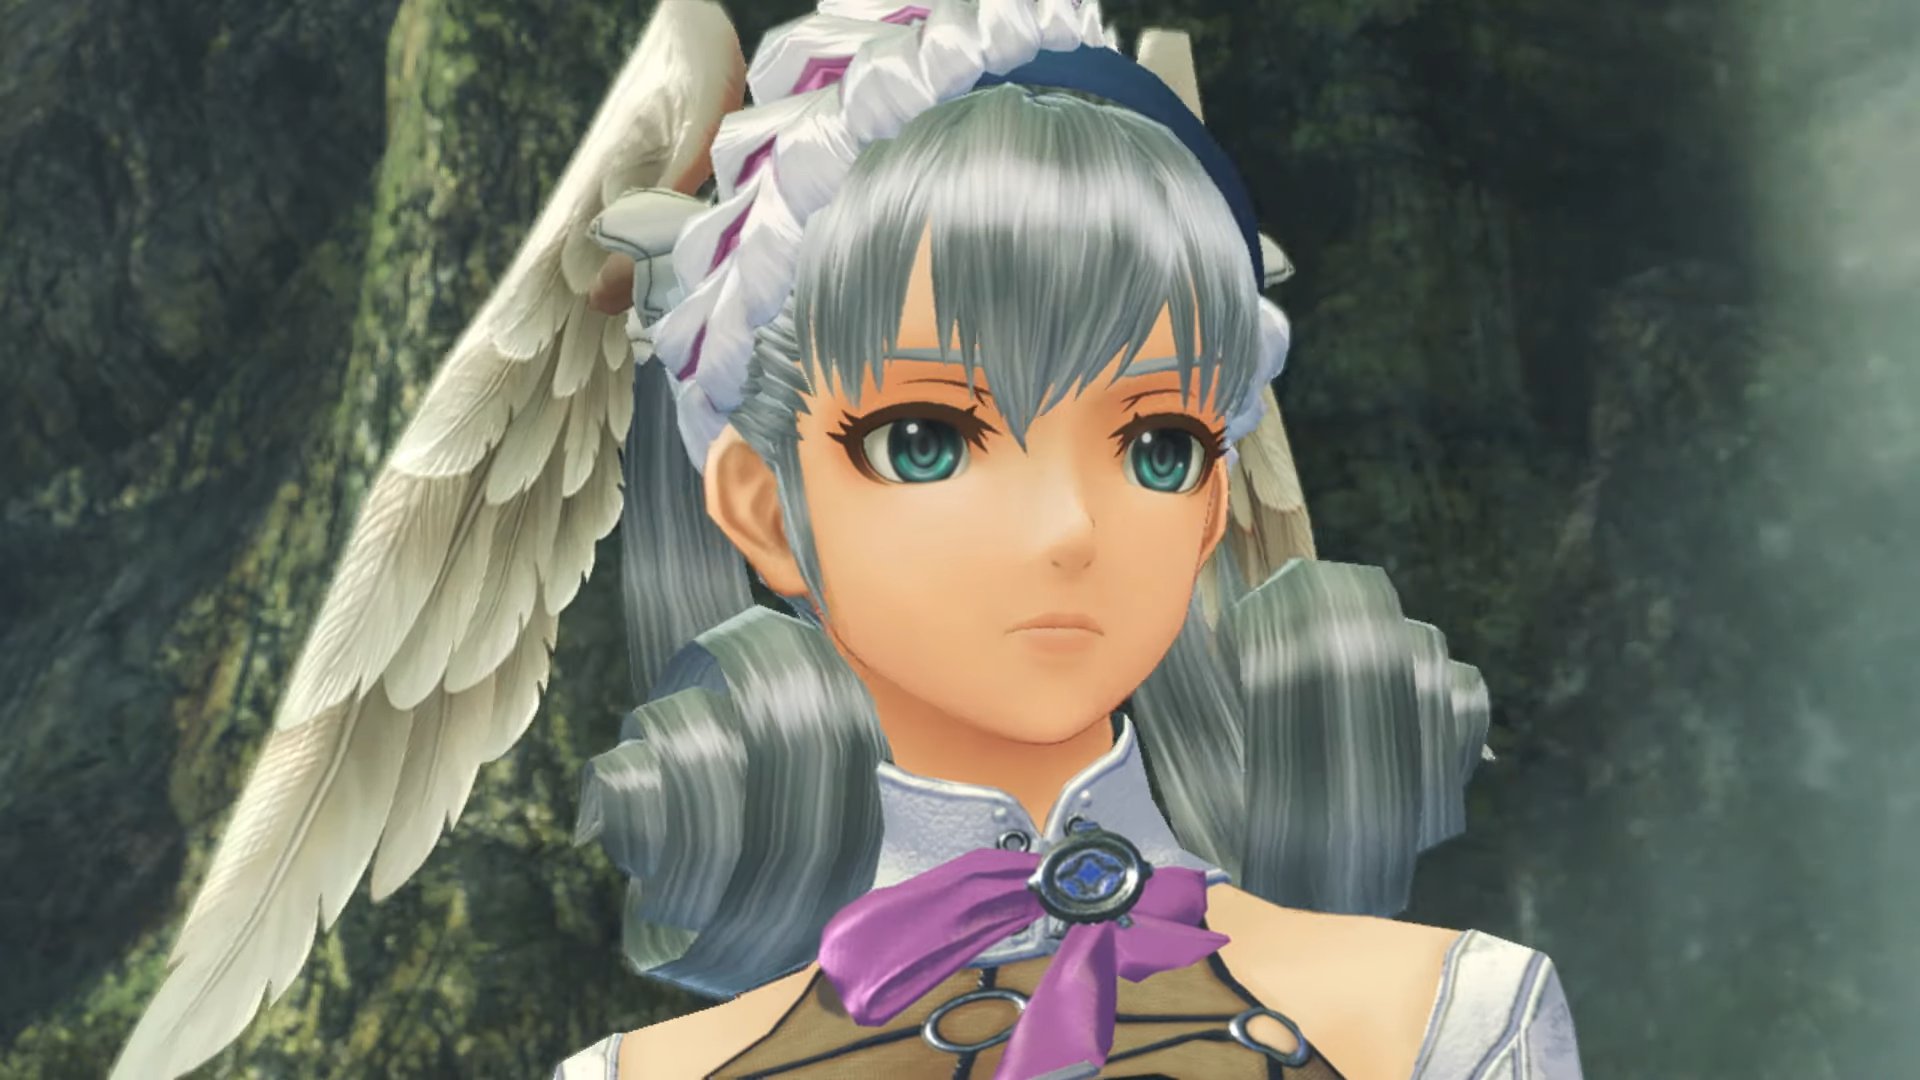 Voice actress suggests Xenoblade Chronicles 3 could be in the works  VGC